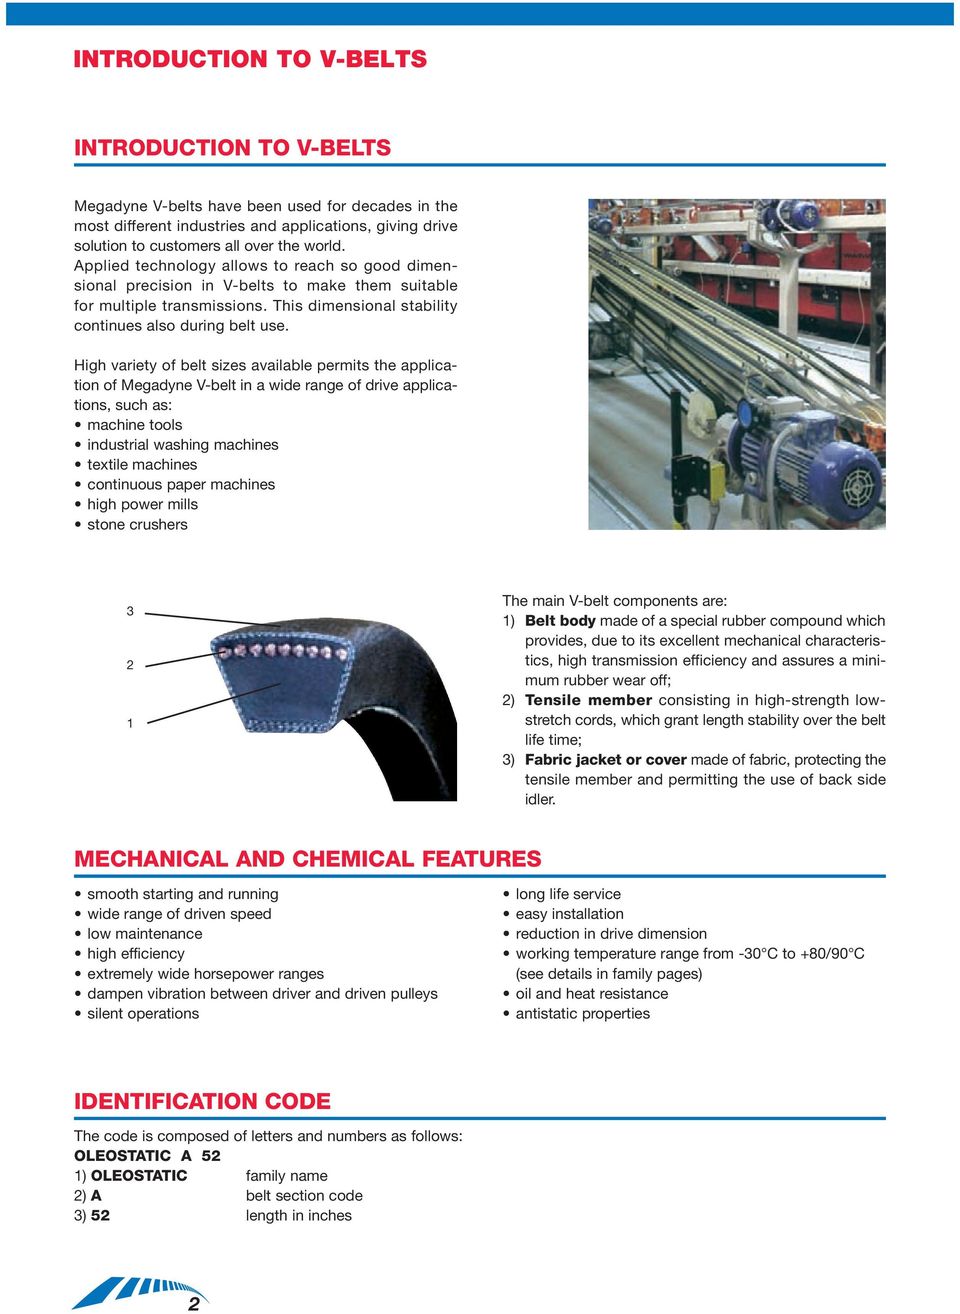 High variety of belt sizes available permits the application of Megadyne V-belt in a wide range of drive applications, such as: machine tools industrial washing machines textile machines continuous